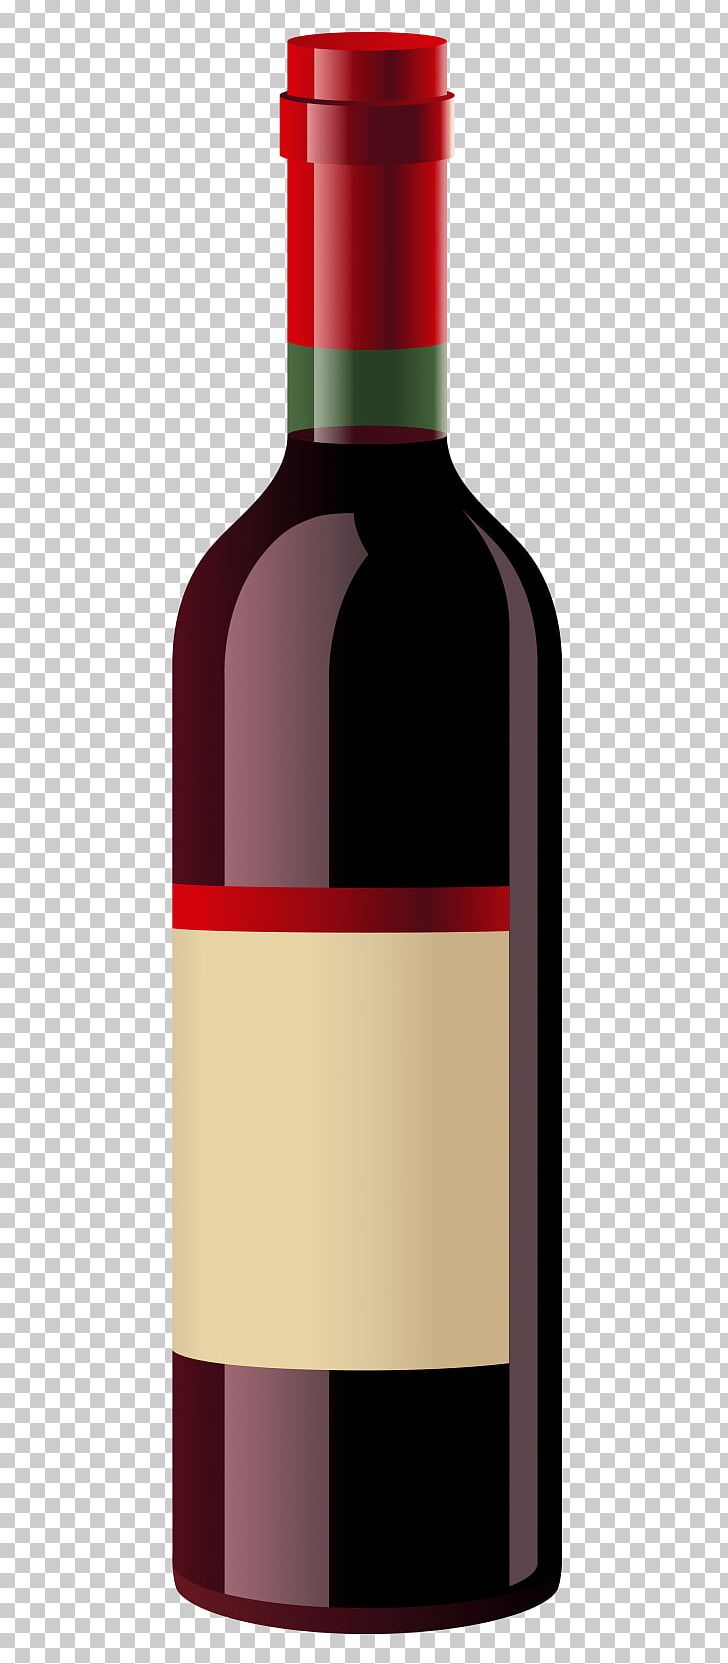 Red Wine White Wine Bottle PNG, Clipart, Alcoholic Drink, Bottle, Download, Drinkware, Food Drinks Free PNG Download